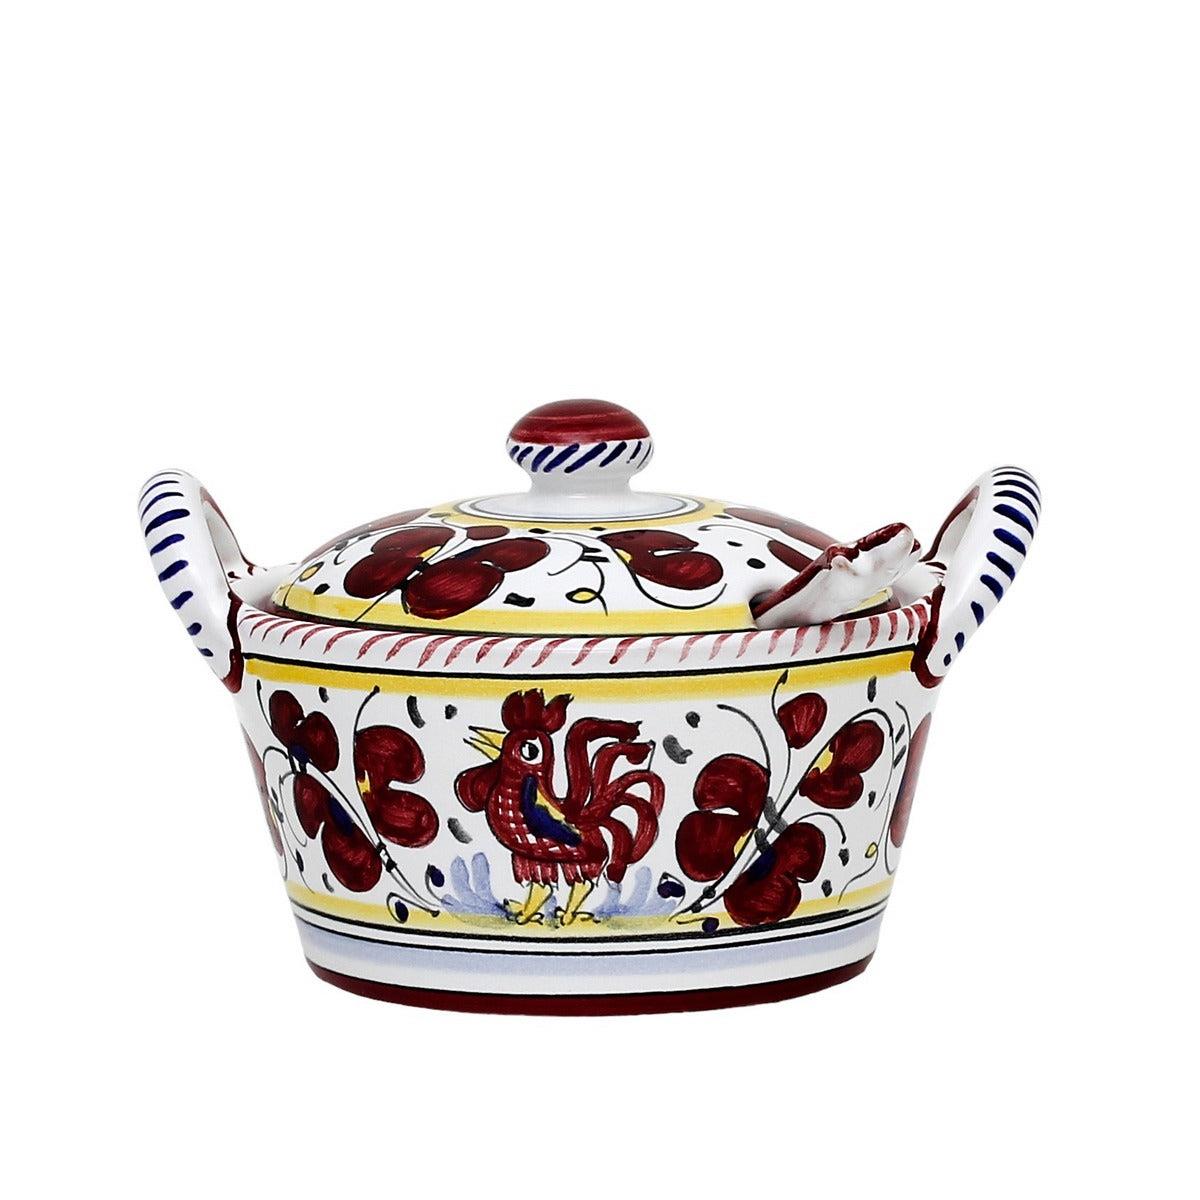 Bowl With Spoon ORVIETO ROOSTER Deruta Majolica Red Ceramic Handmade Dishwasher-Image 1